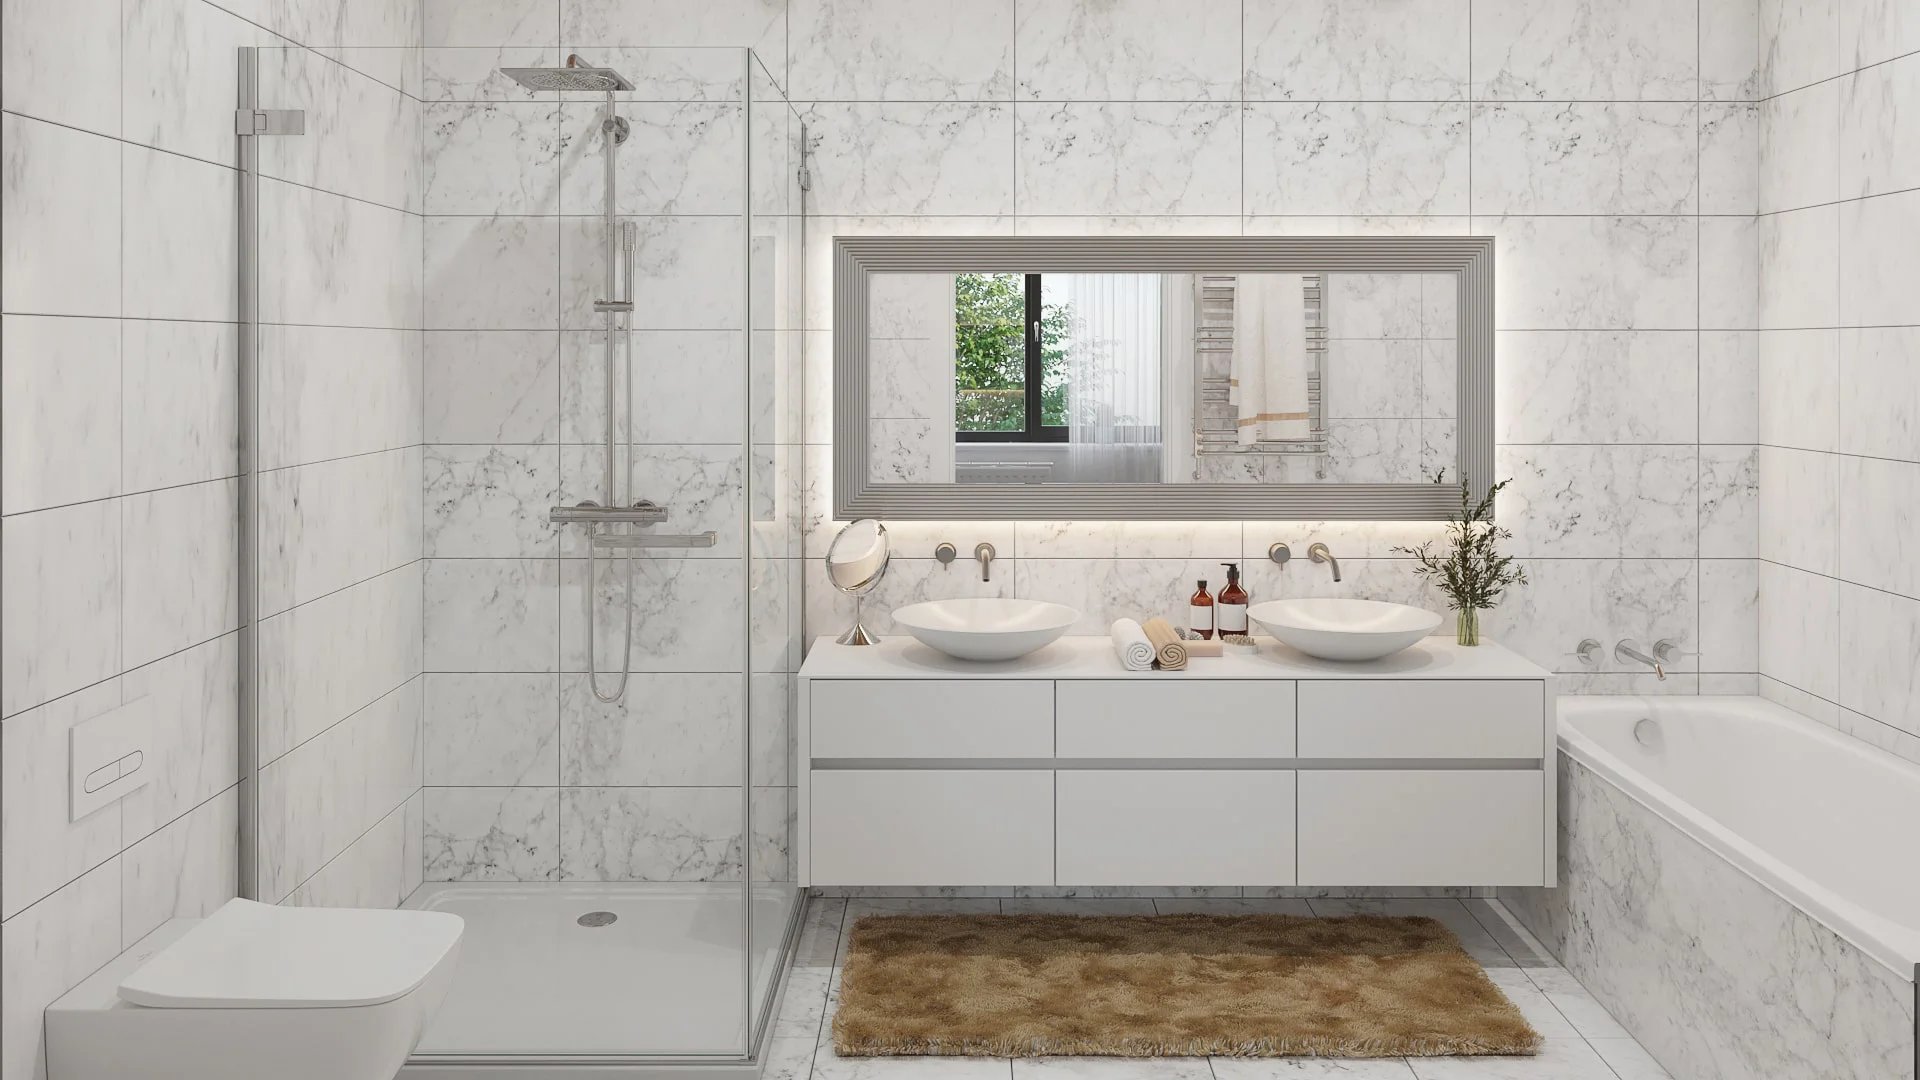 Architectural visualization. Detached house. Bathroom